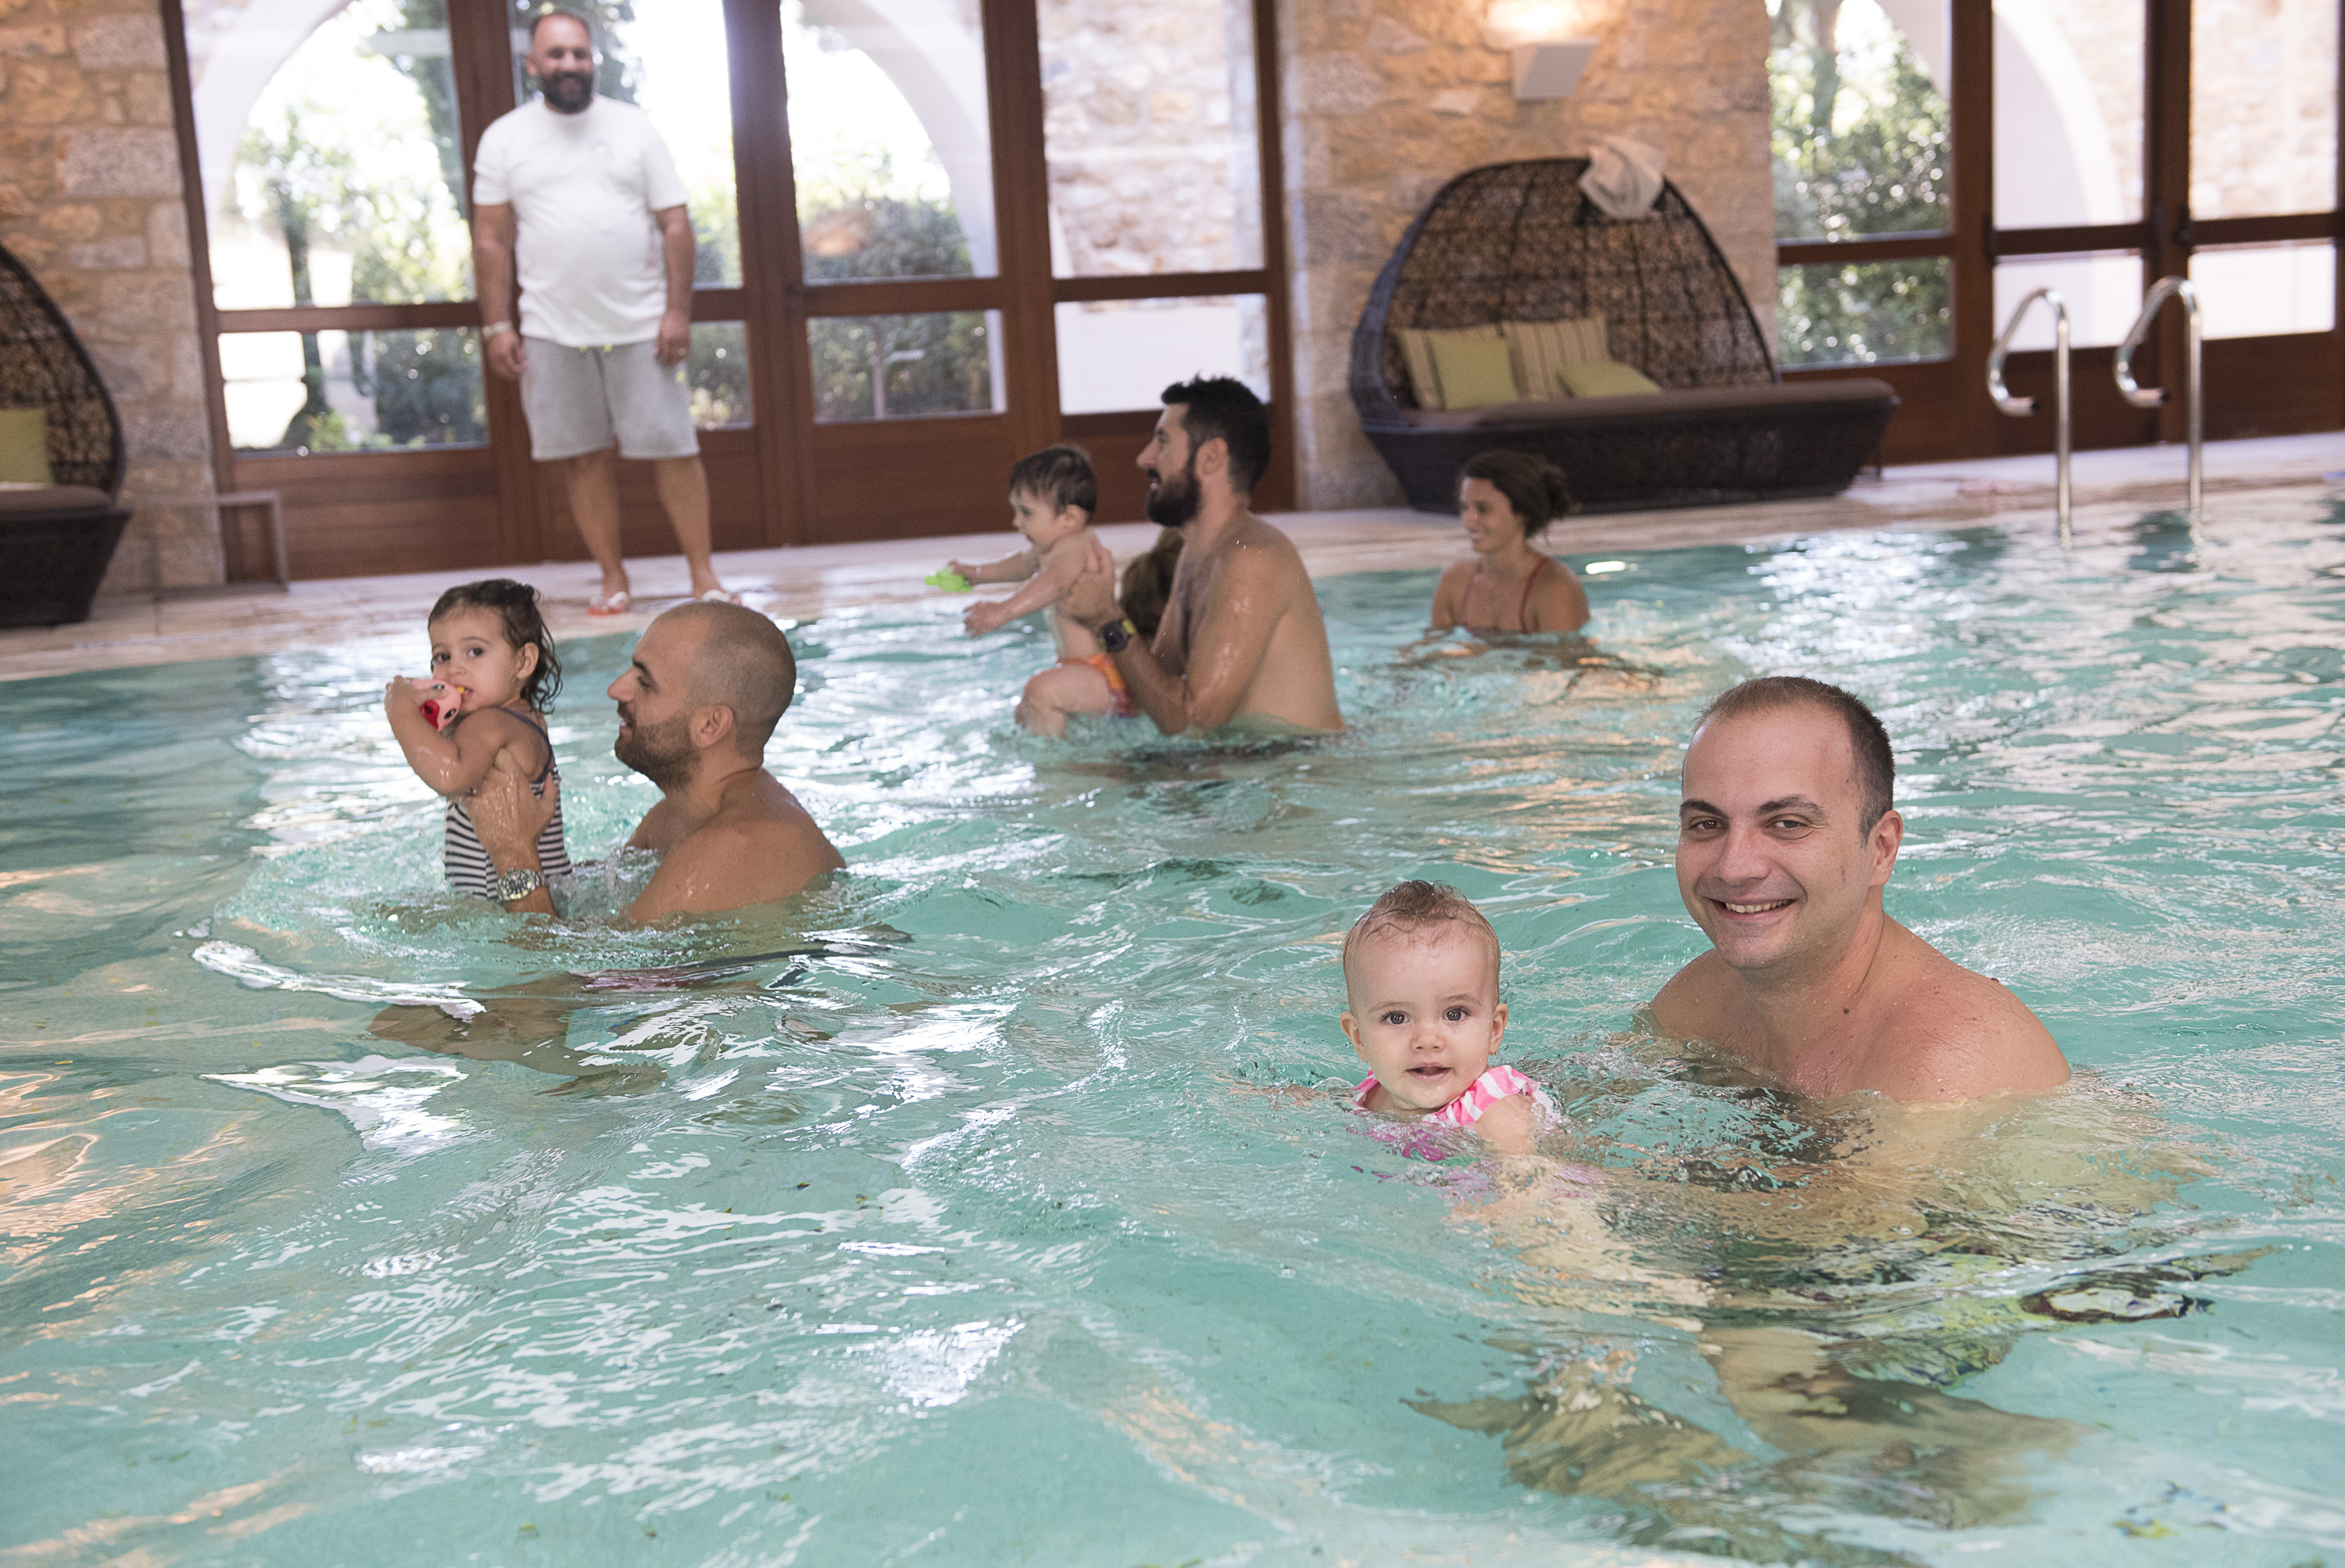 The Westin indoor pool was filled with happy toddlers during baby swimming sessions © Vangelis Patsialos